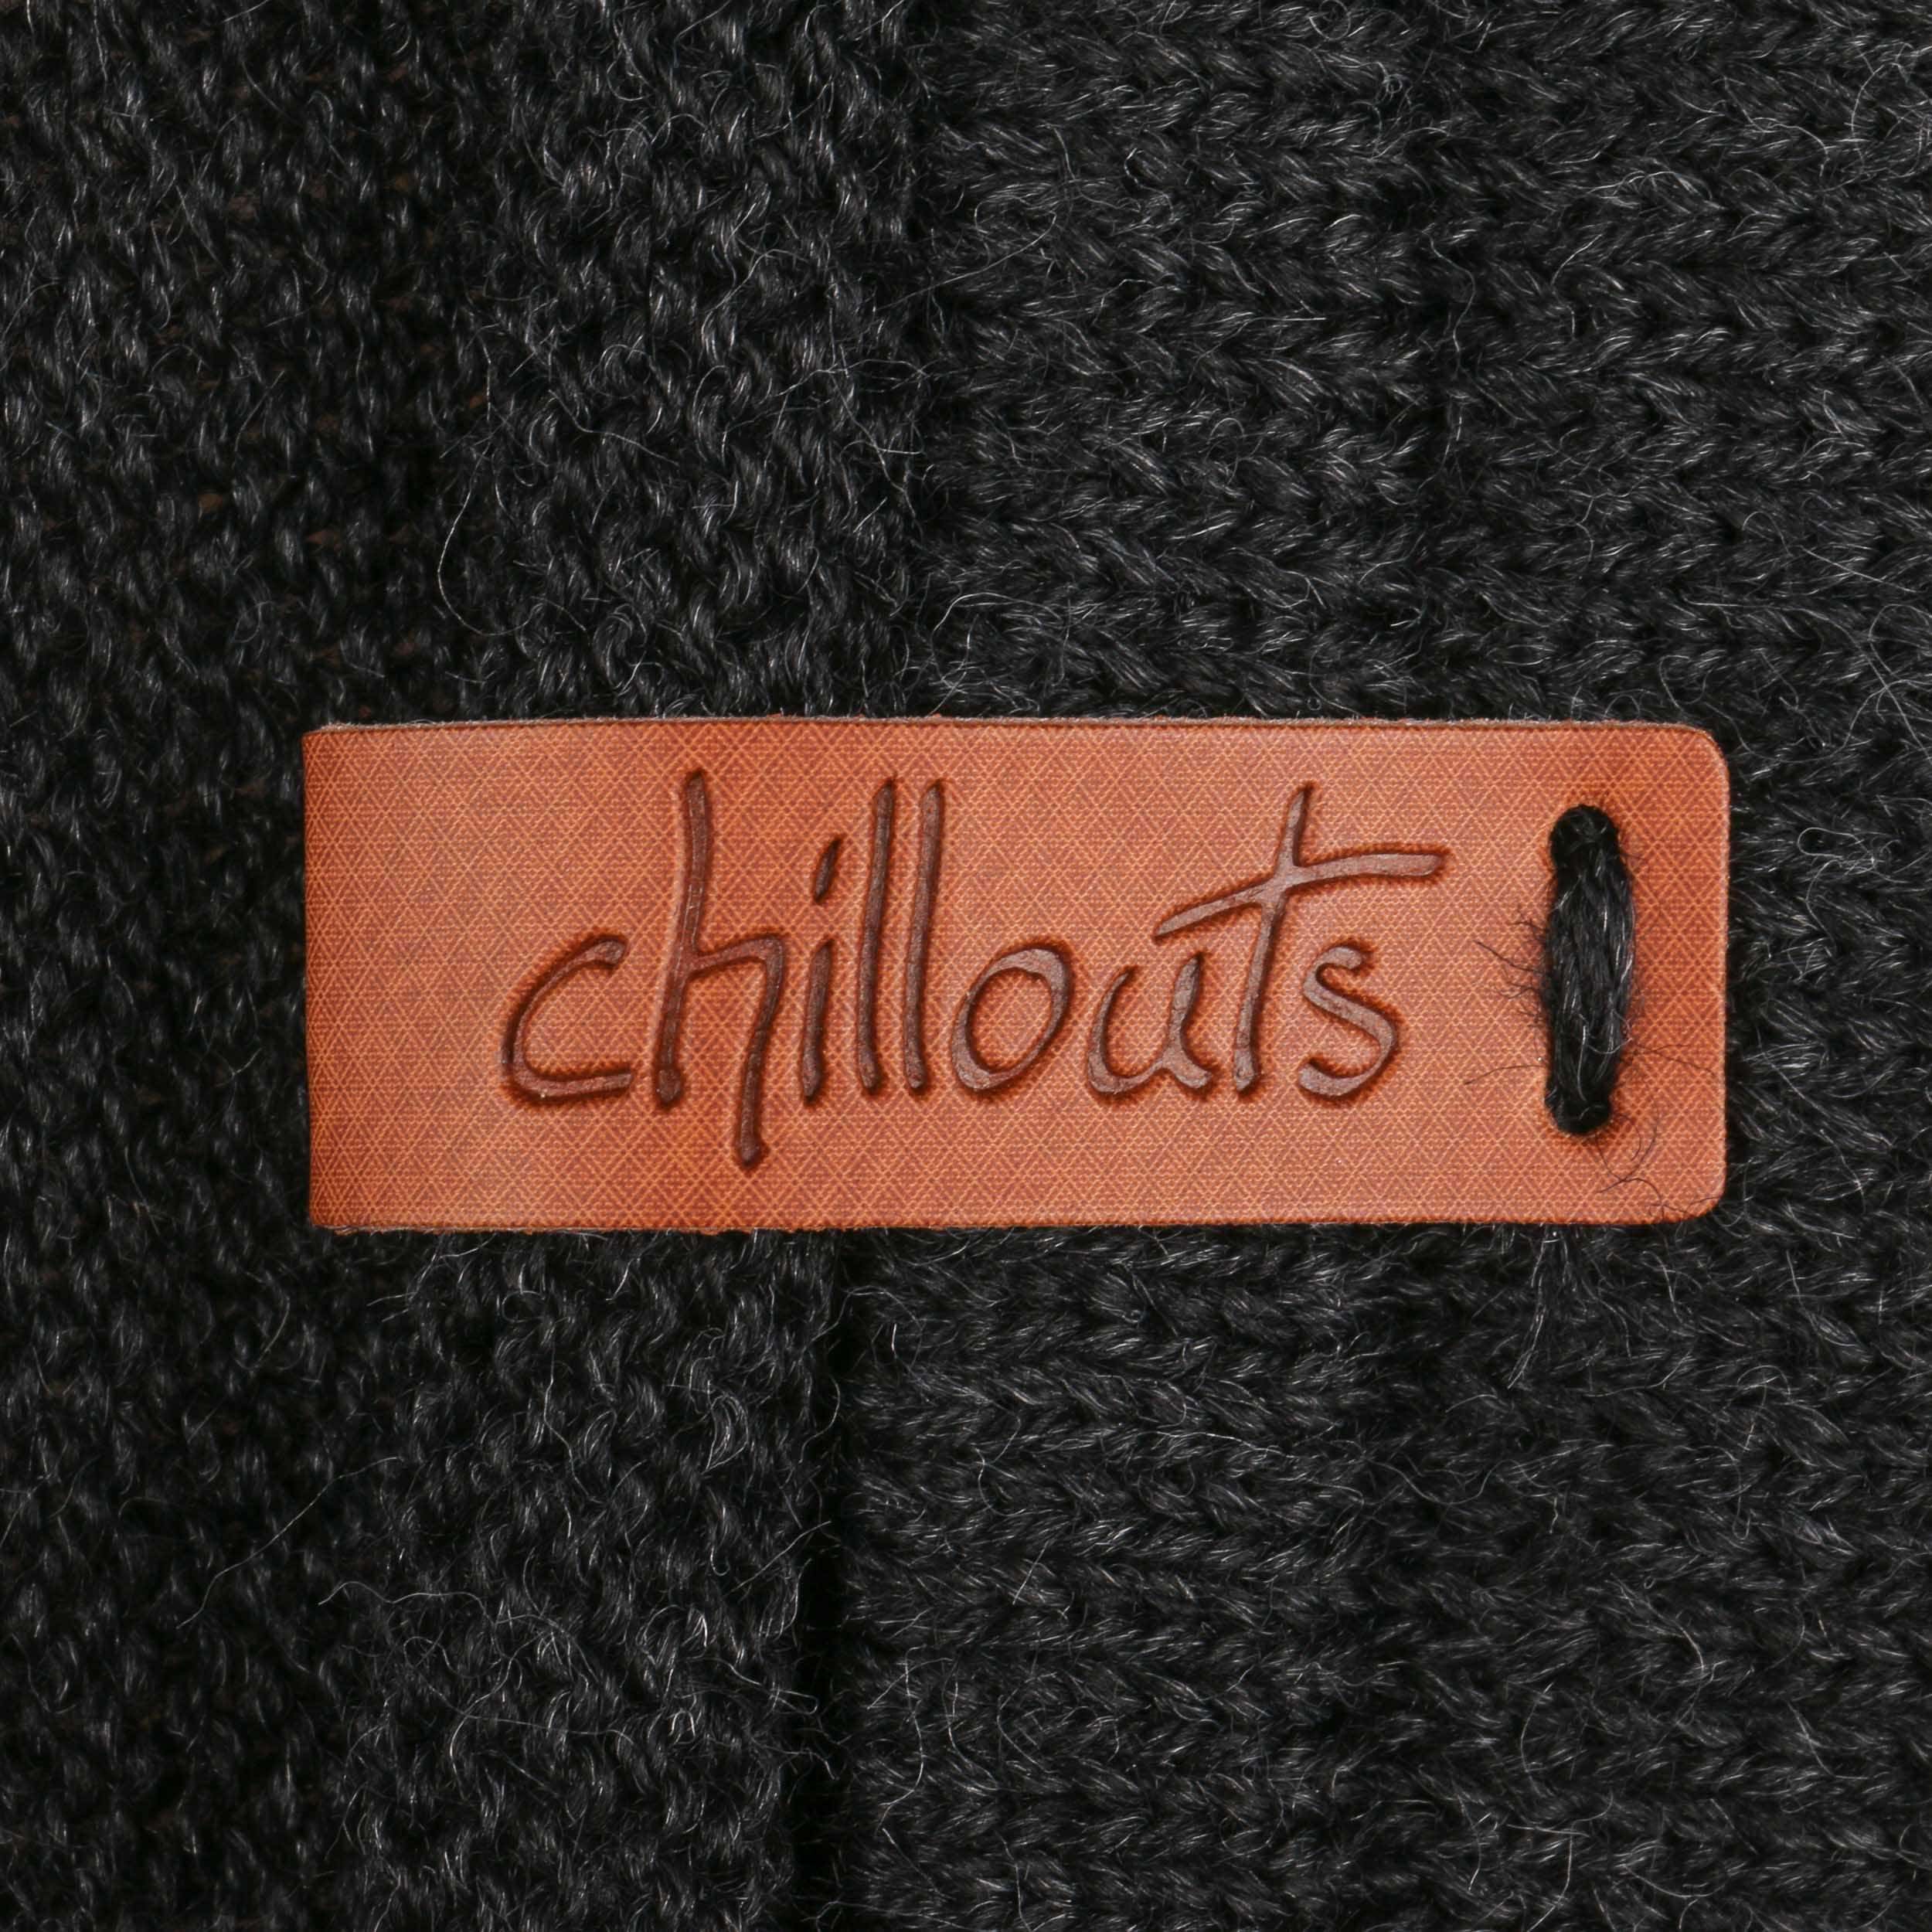 - Oversize Chillouts Leicester 29,95 Beanie € by